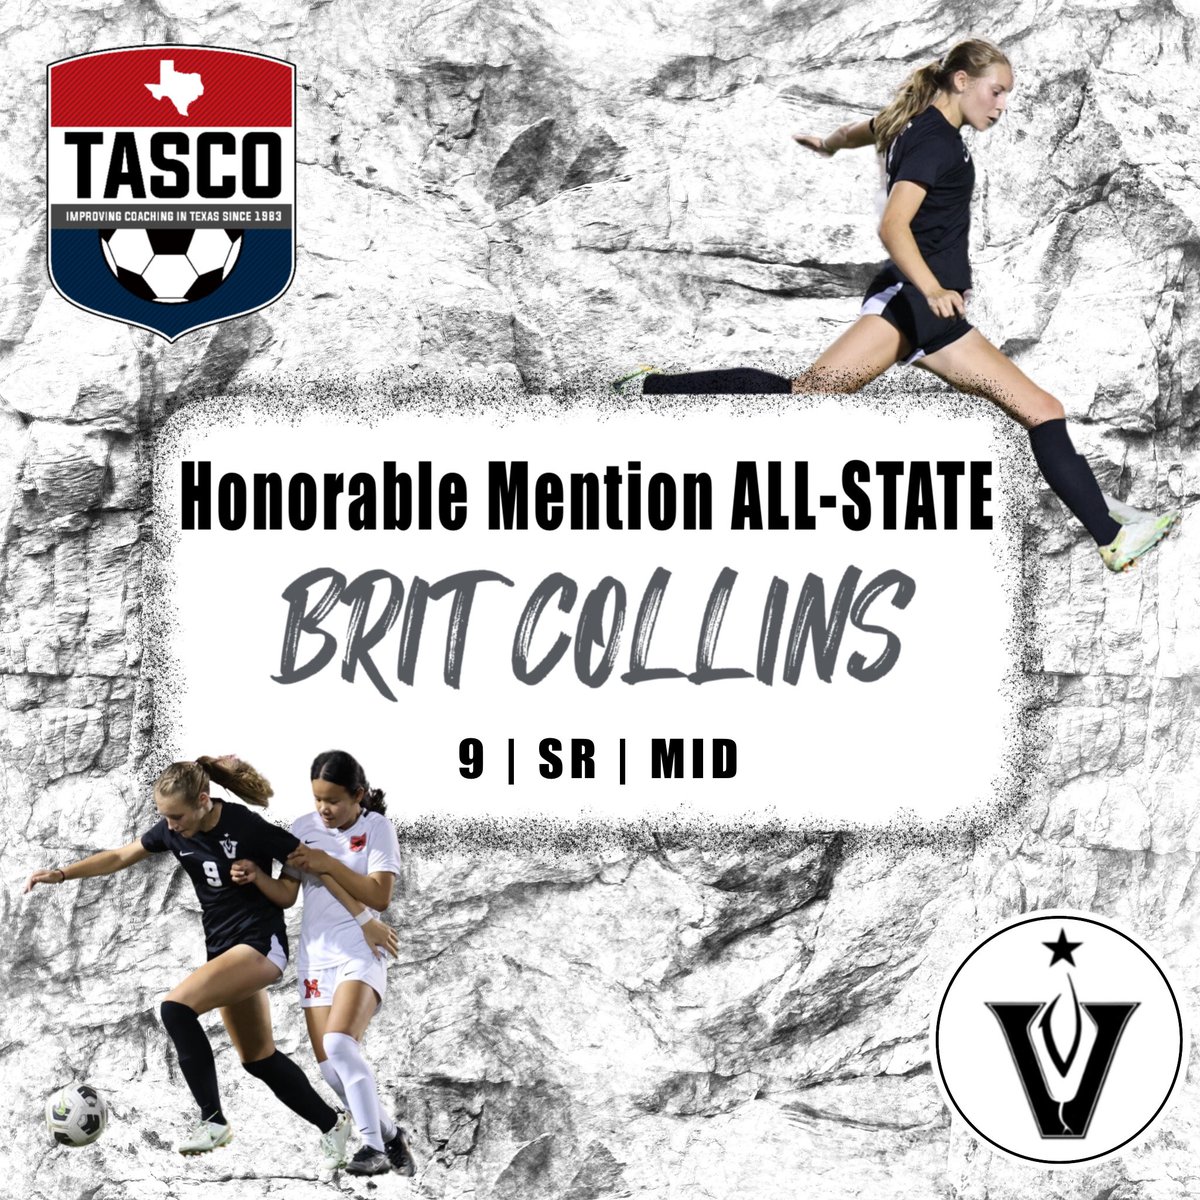 ✨Congratulations✨ to Brit Collins for being named TASCO Honorable Mention ALL-STATE 6A Team